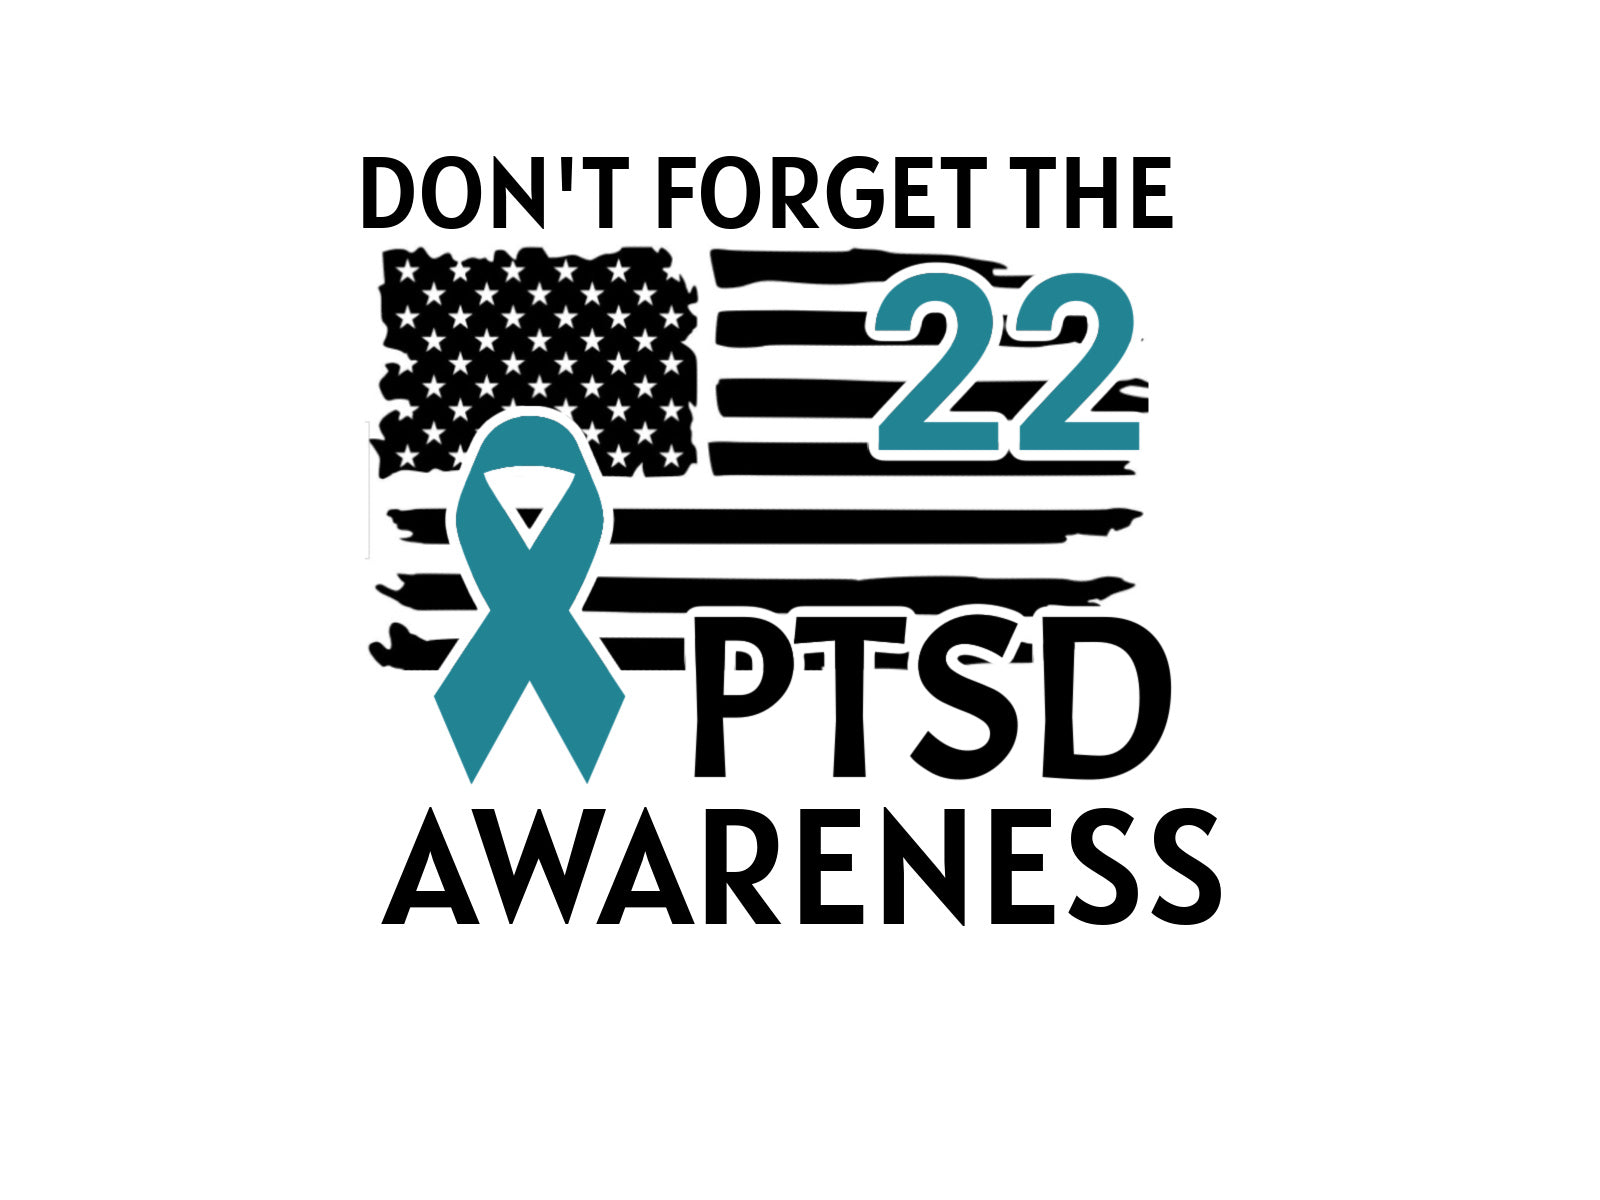 Don't Forget The 22 PTSD Awareness